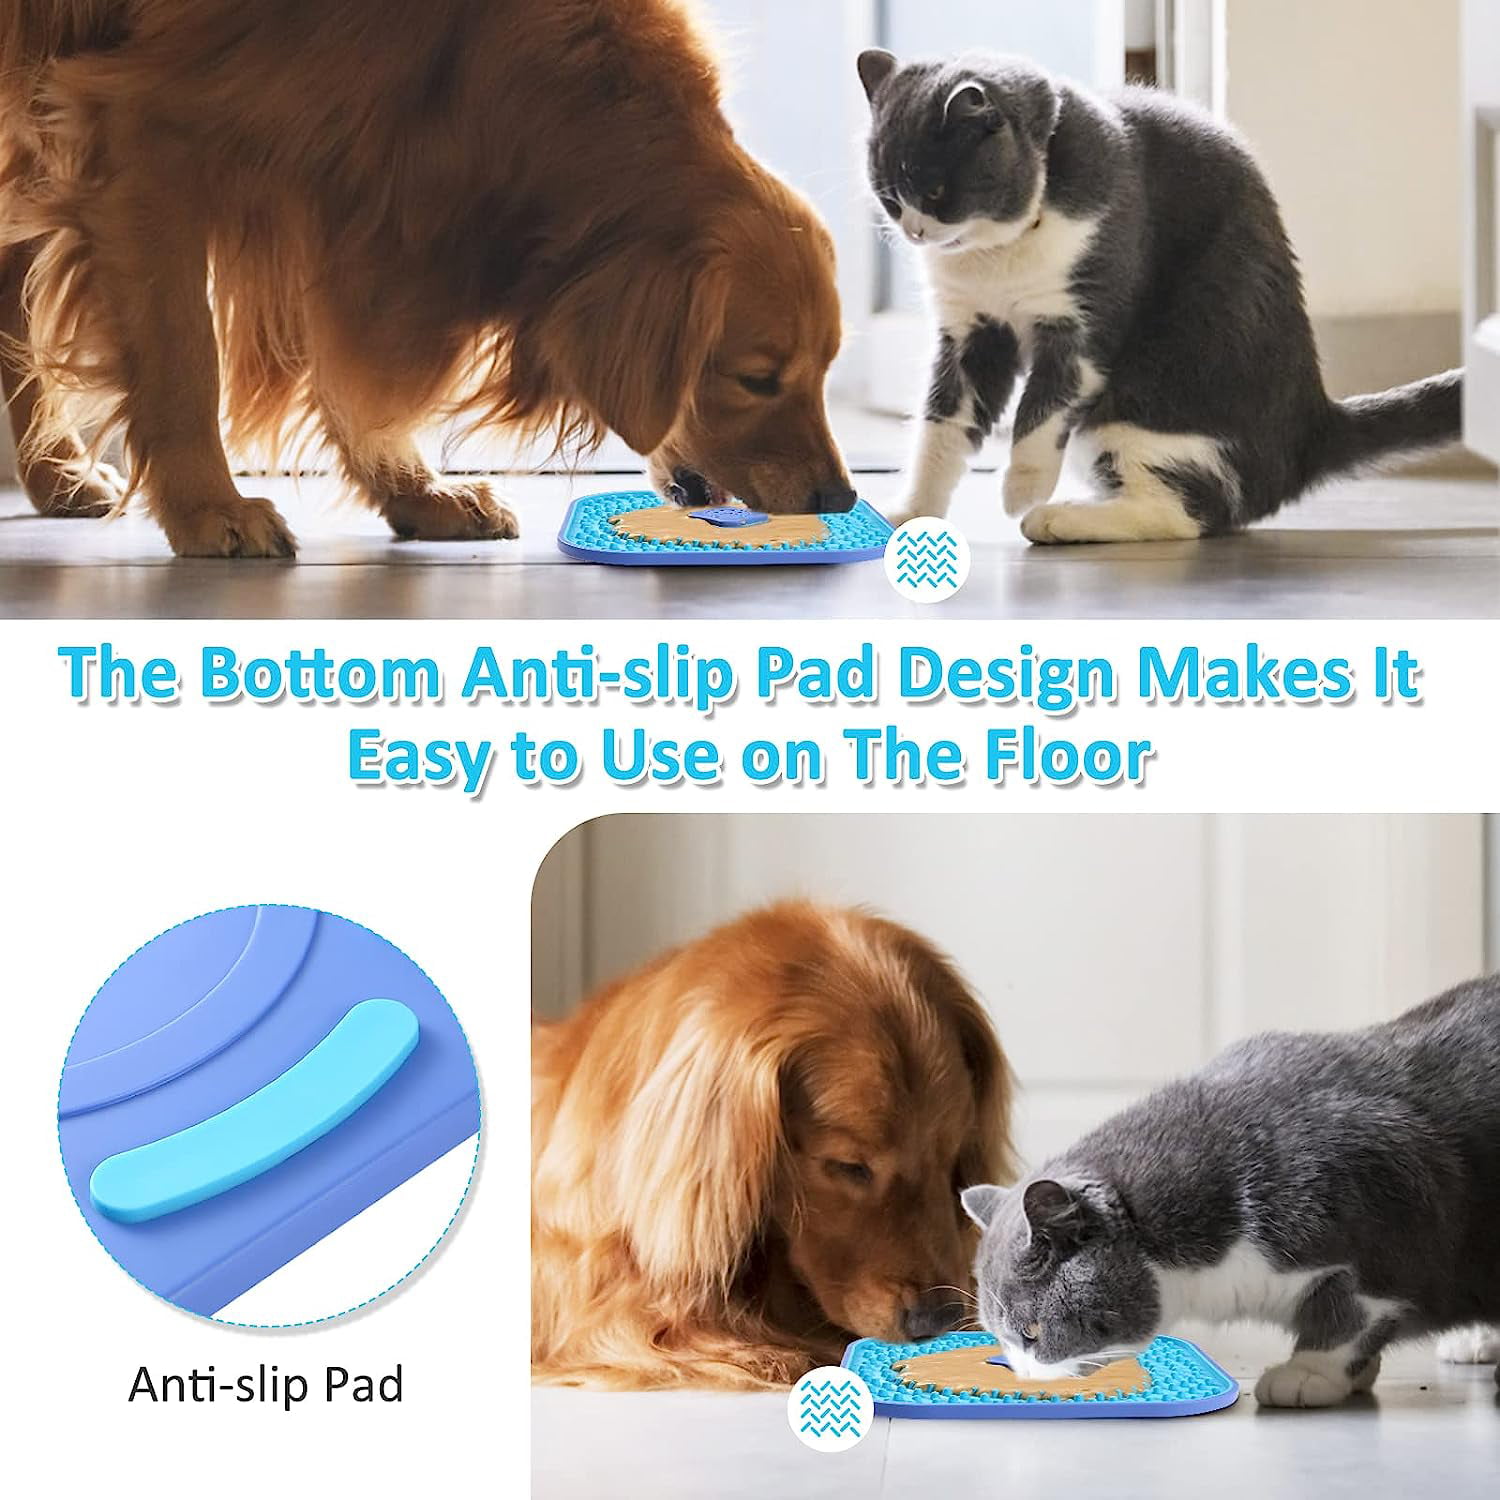 Dog Crate Lick Plate for Dogs Slow Feeder Mat Dog Bowls Cage Training Tool  for Puppy Pet Reduce Anxiety Gate Training Supplies Aids Multifunctional